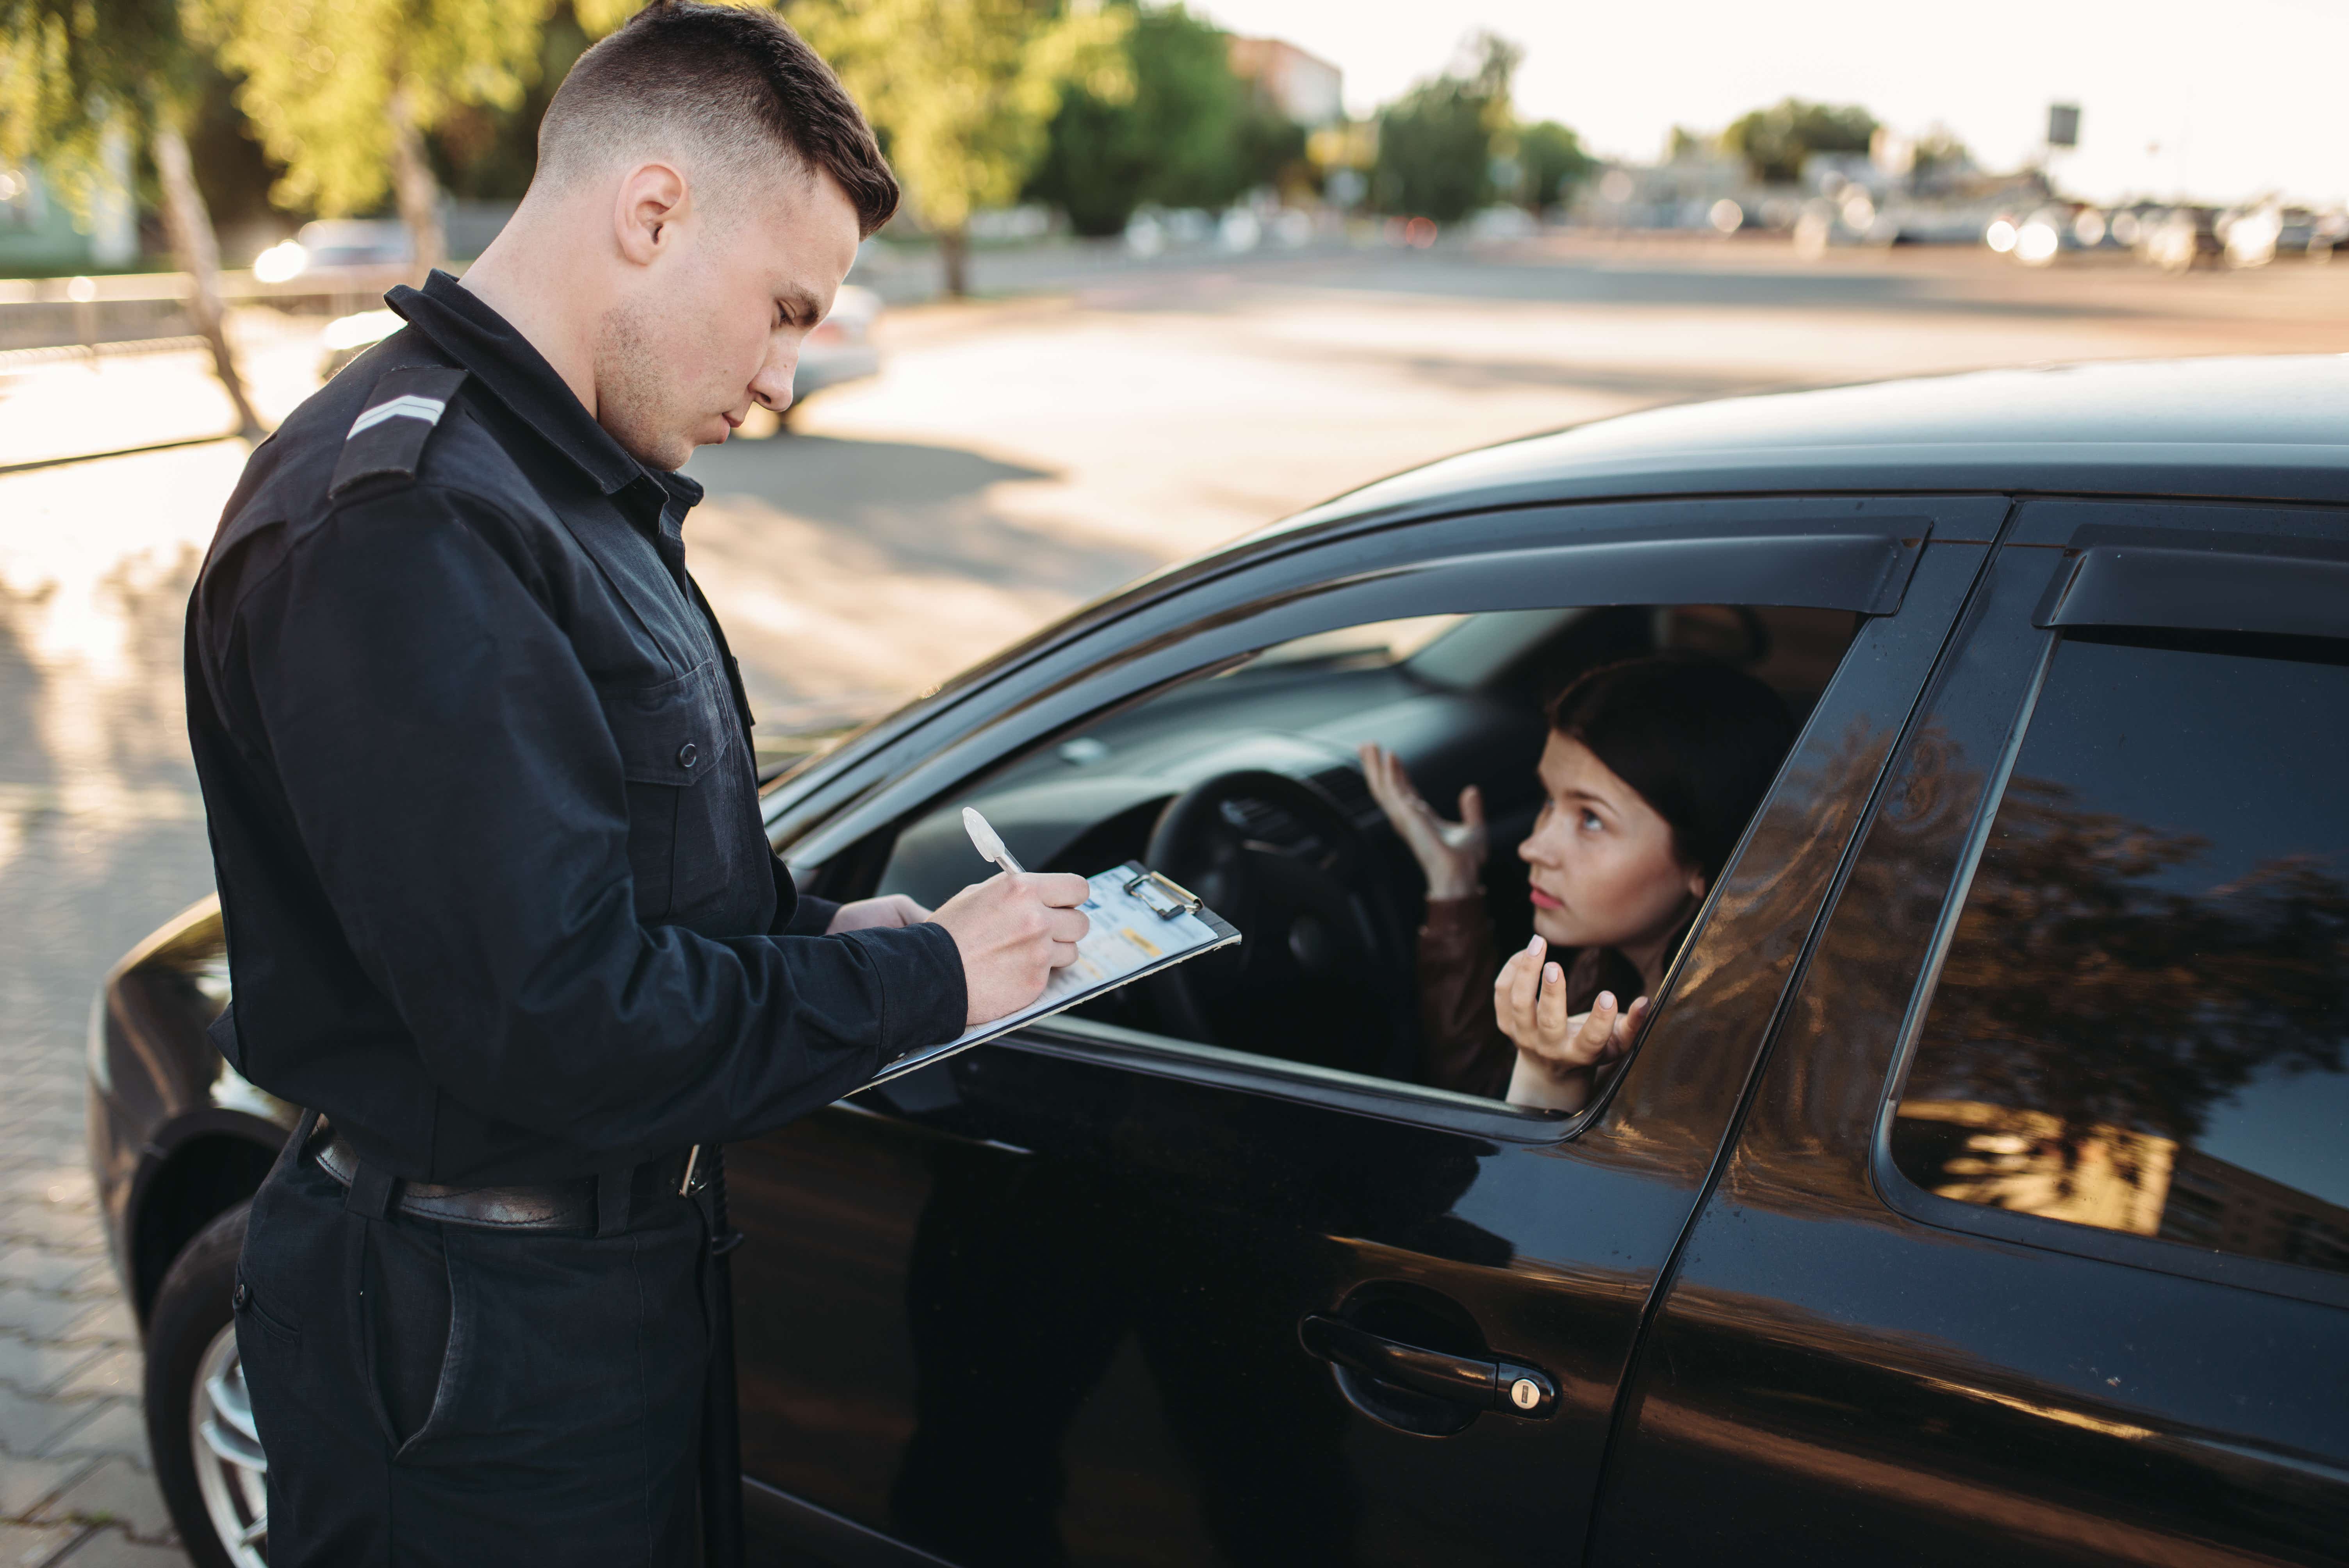 Officer giving woman a ticket in a black car.